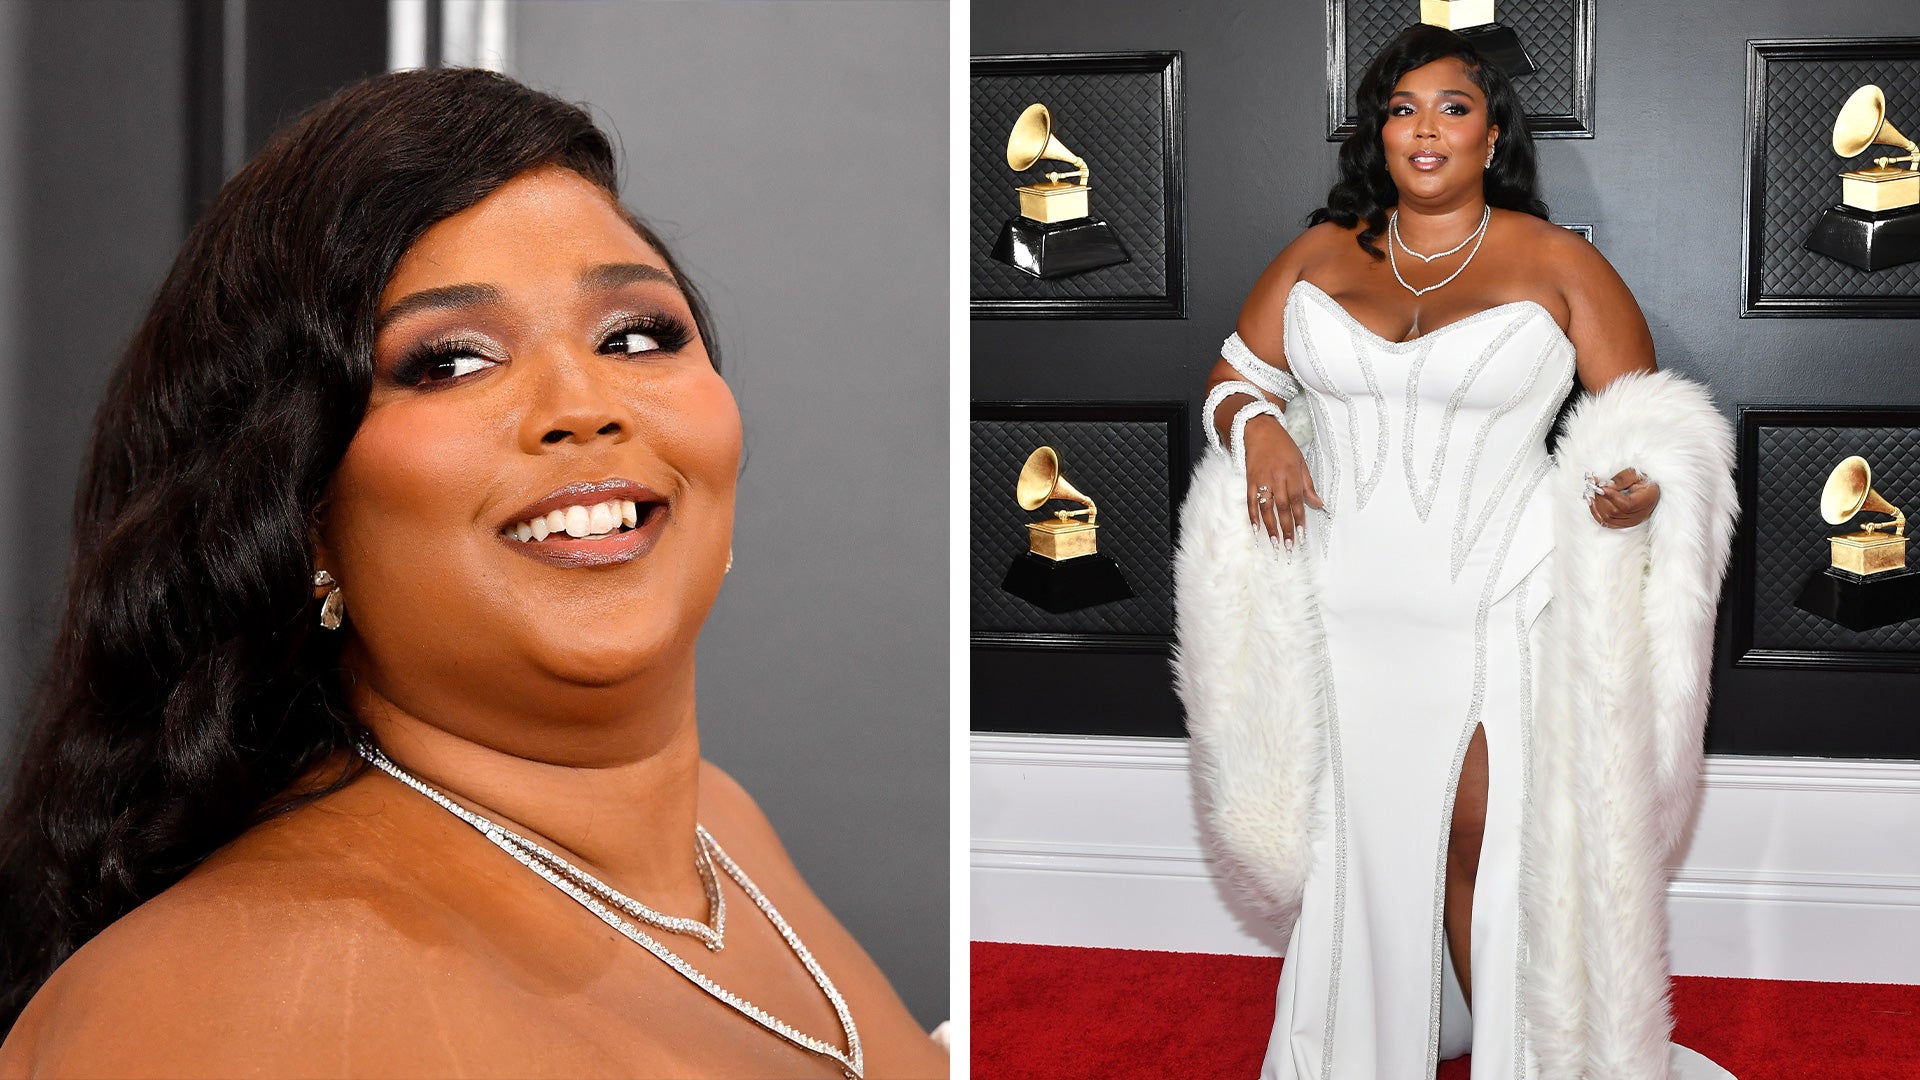 Grammys 2020 red carpet: Lizzo and more stars step out in style